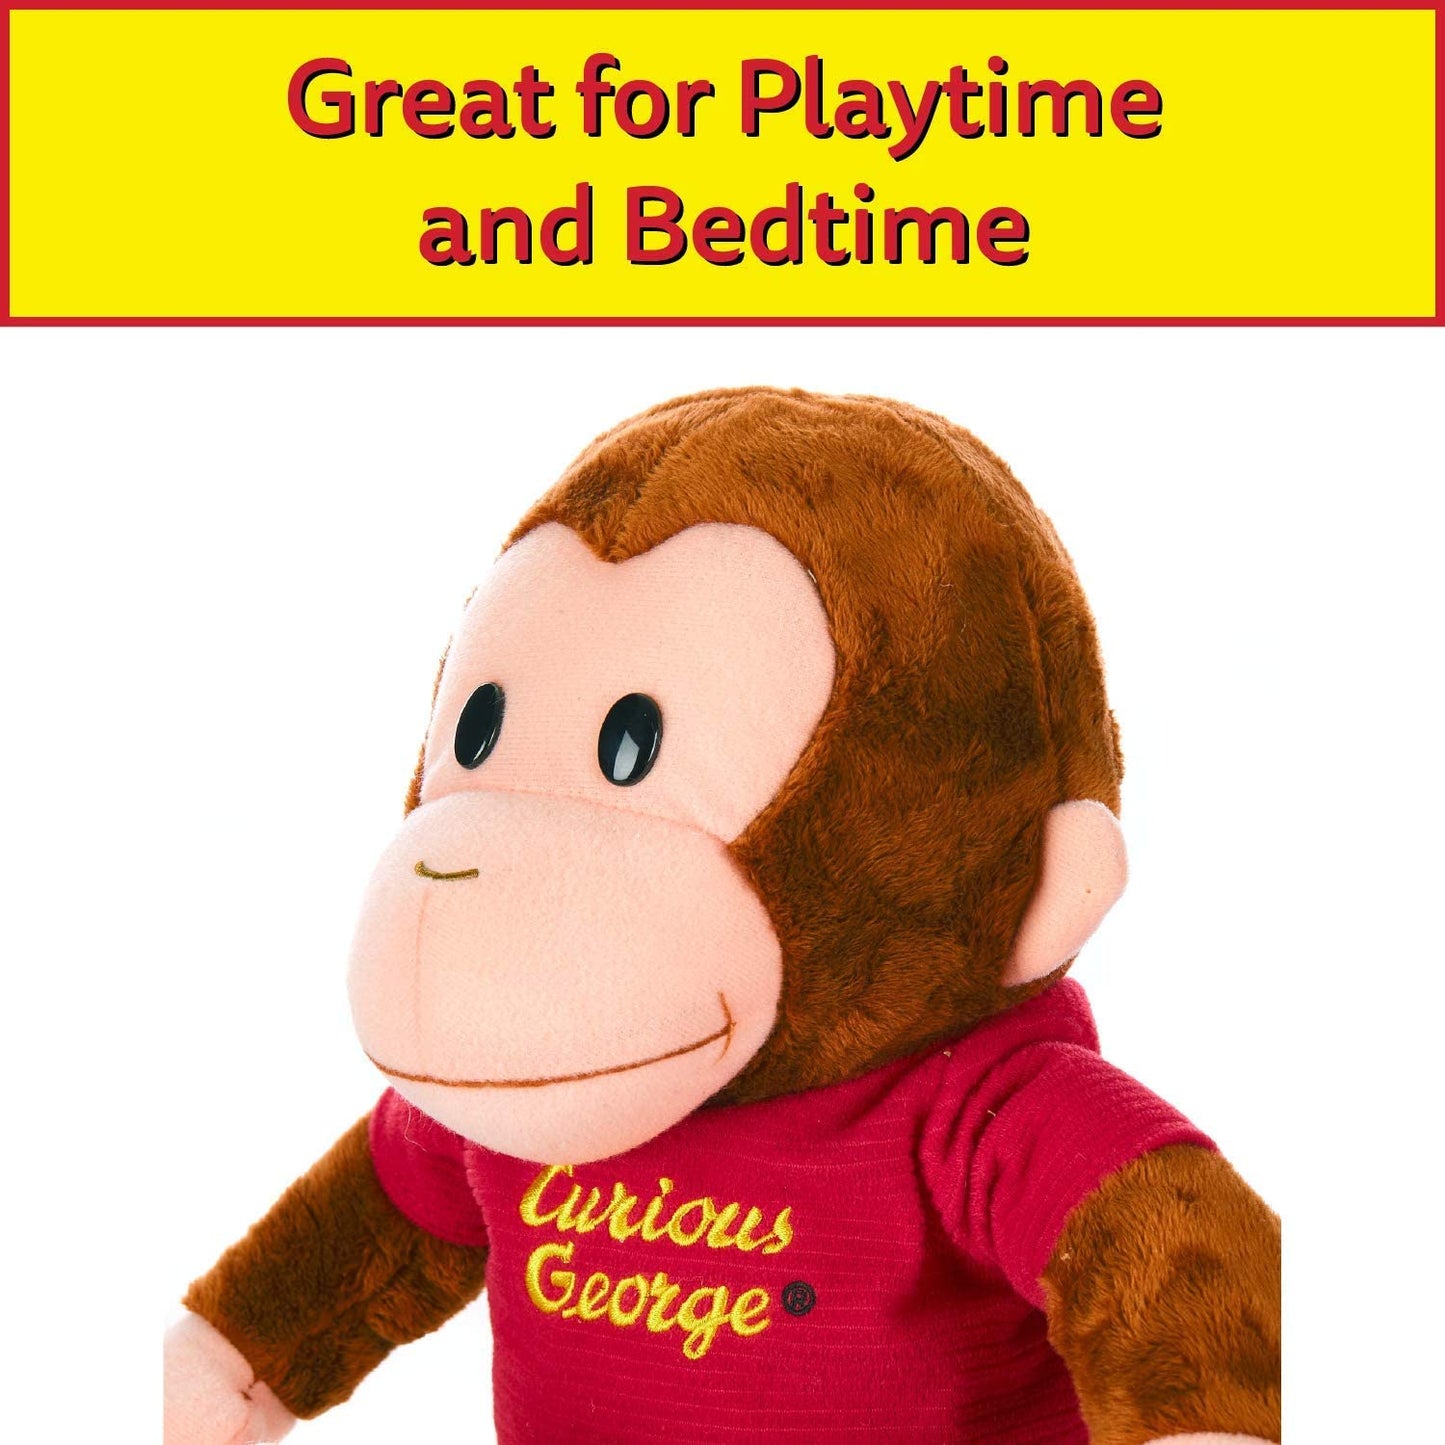 Large Curious George Monkey Plush - Classic George 12" Super Soft, Adorable, Charmingly Detailed Stuffed Animal